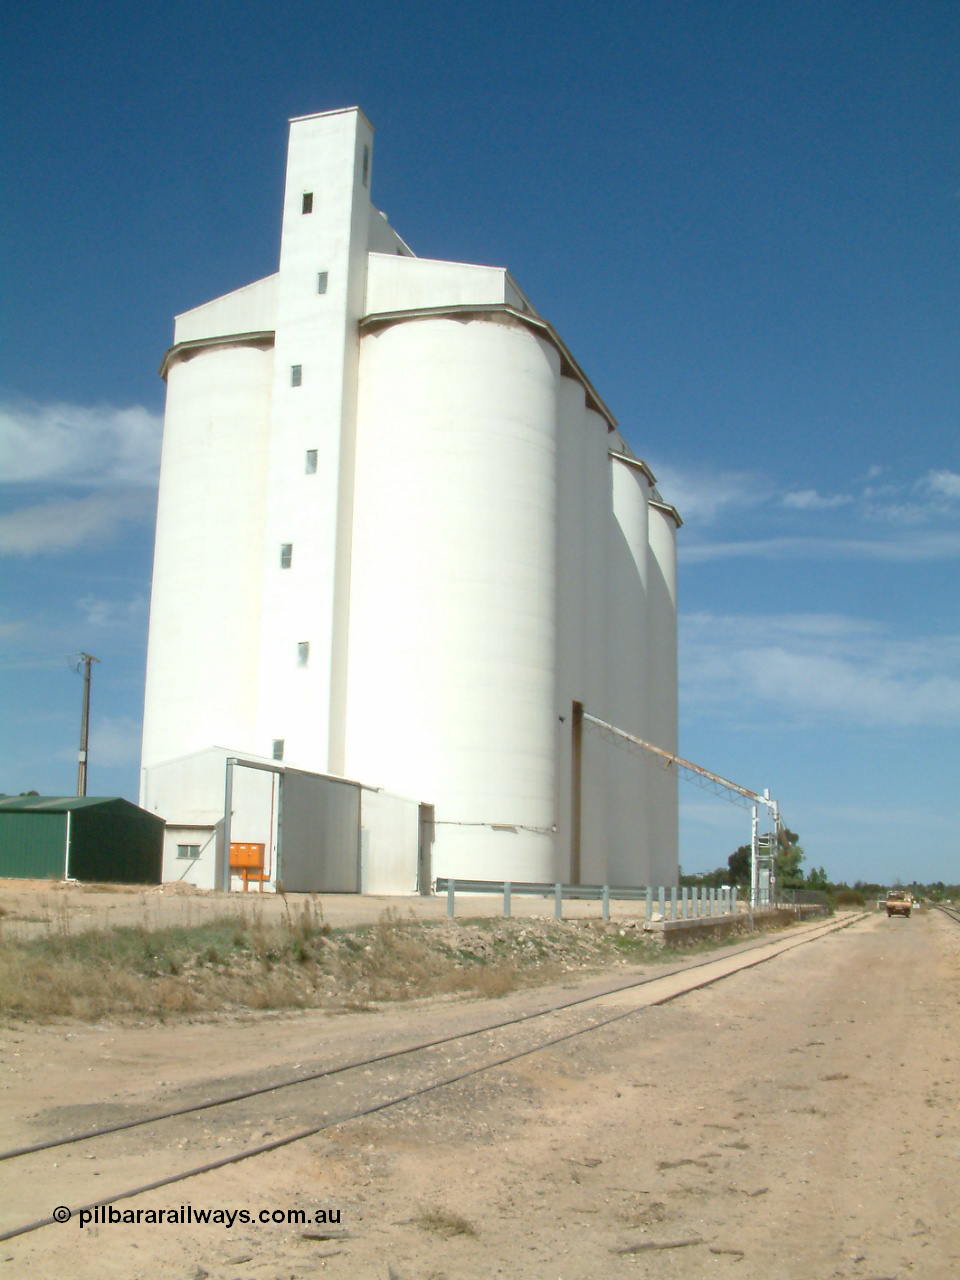 030405 140314
Kyancutta, yard view of concrete silo complex for SACBH and outflow spout, looking south, 5th April 2003.
